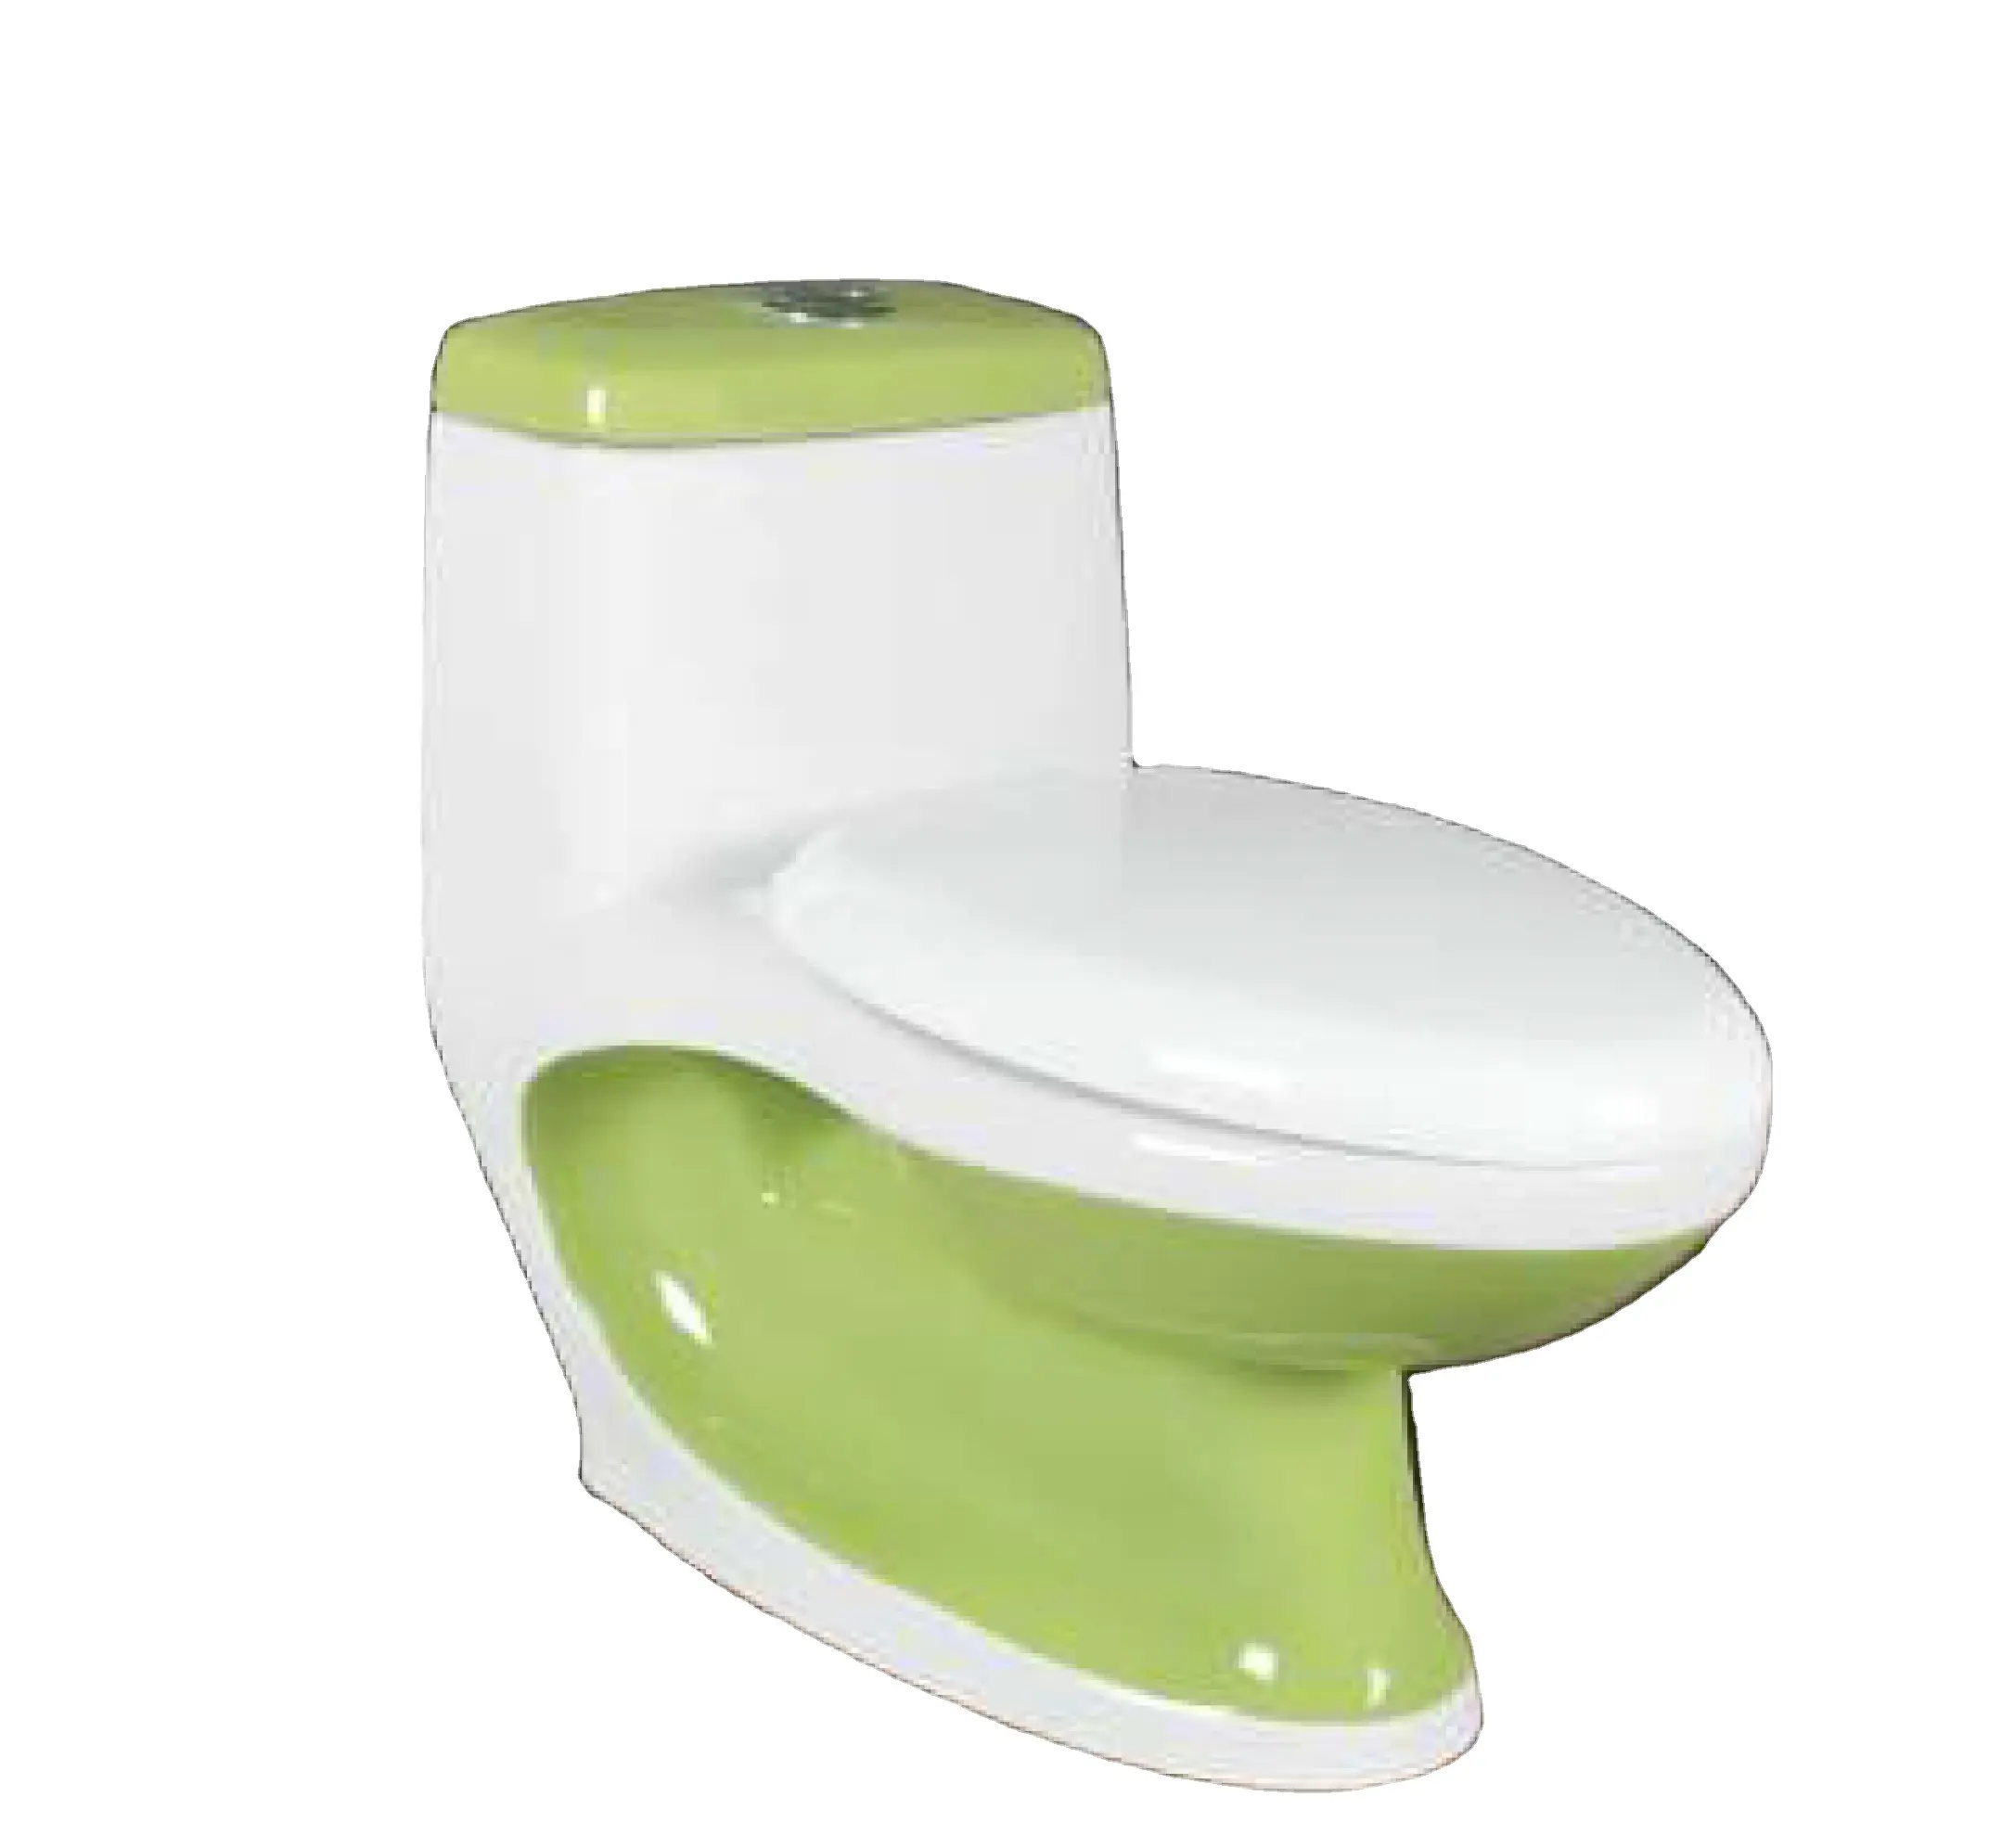 Bathroom Sanitary Ware Products Western Commode Water Closet Modern White Bathroom Ceramic One Piece Toilet Bowl Wc